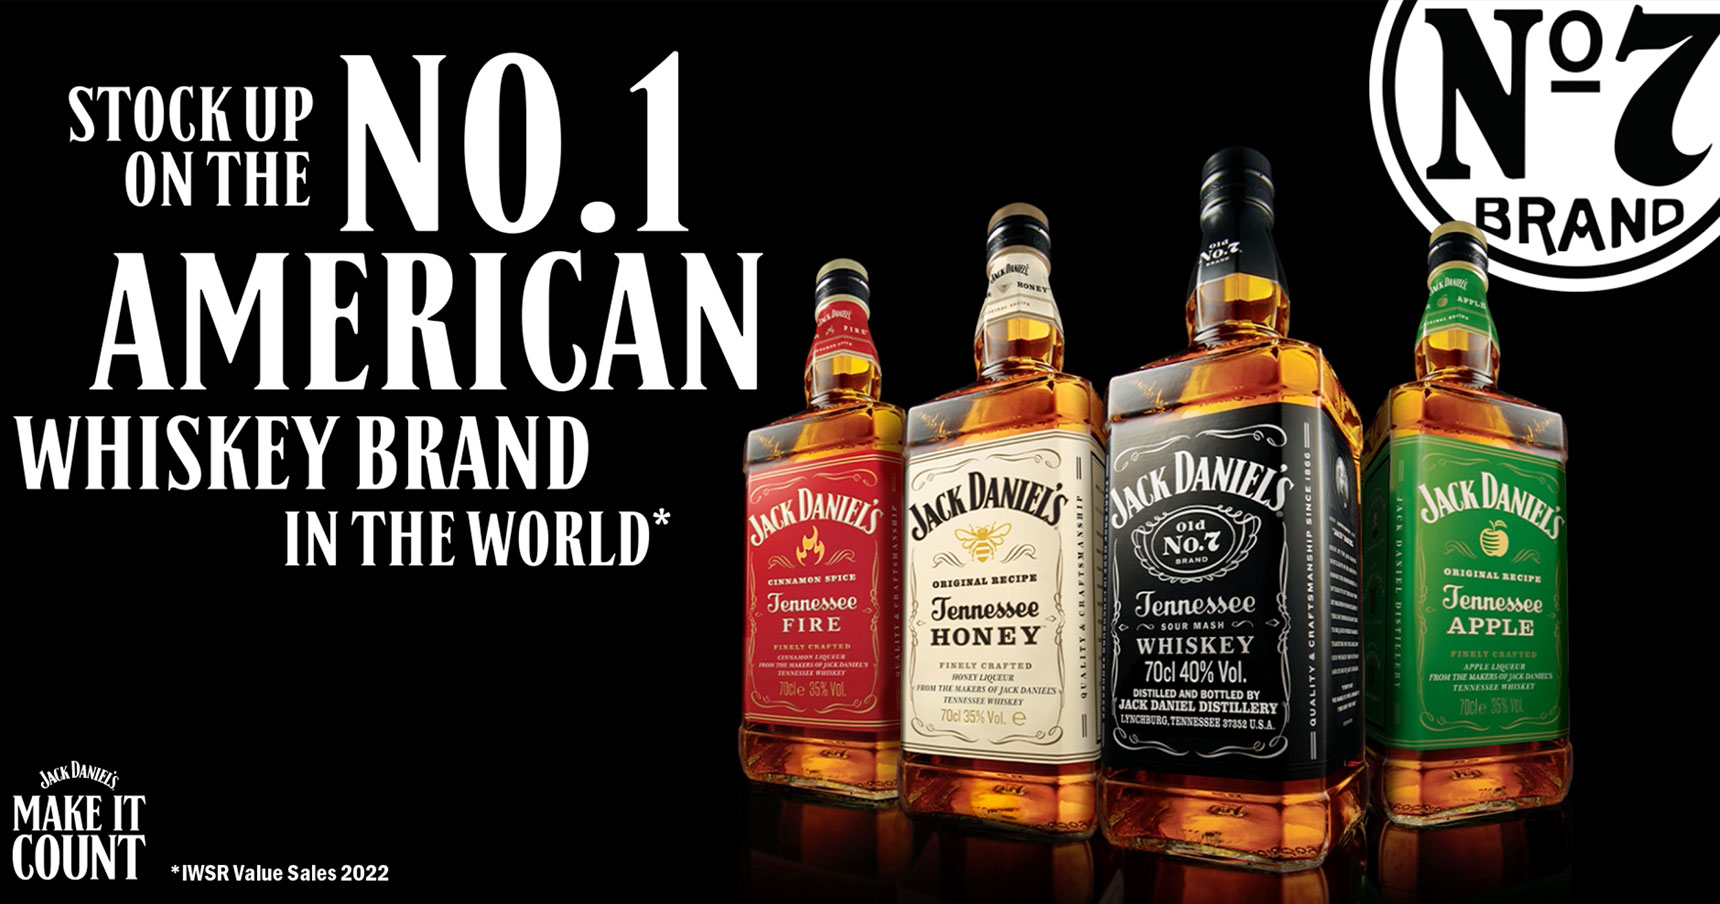 Stock up on the No.1 American Whiskey brand in the world